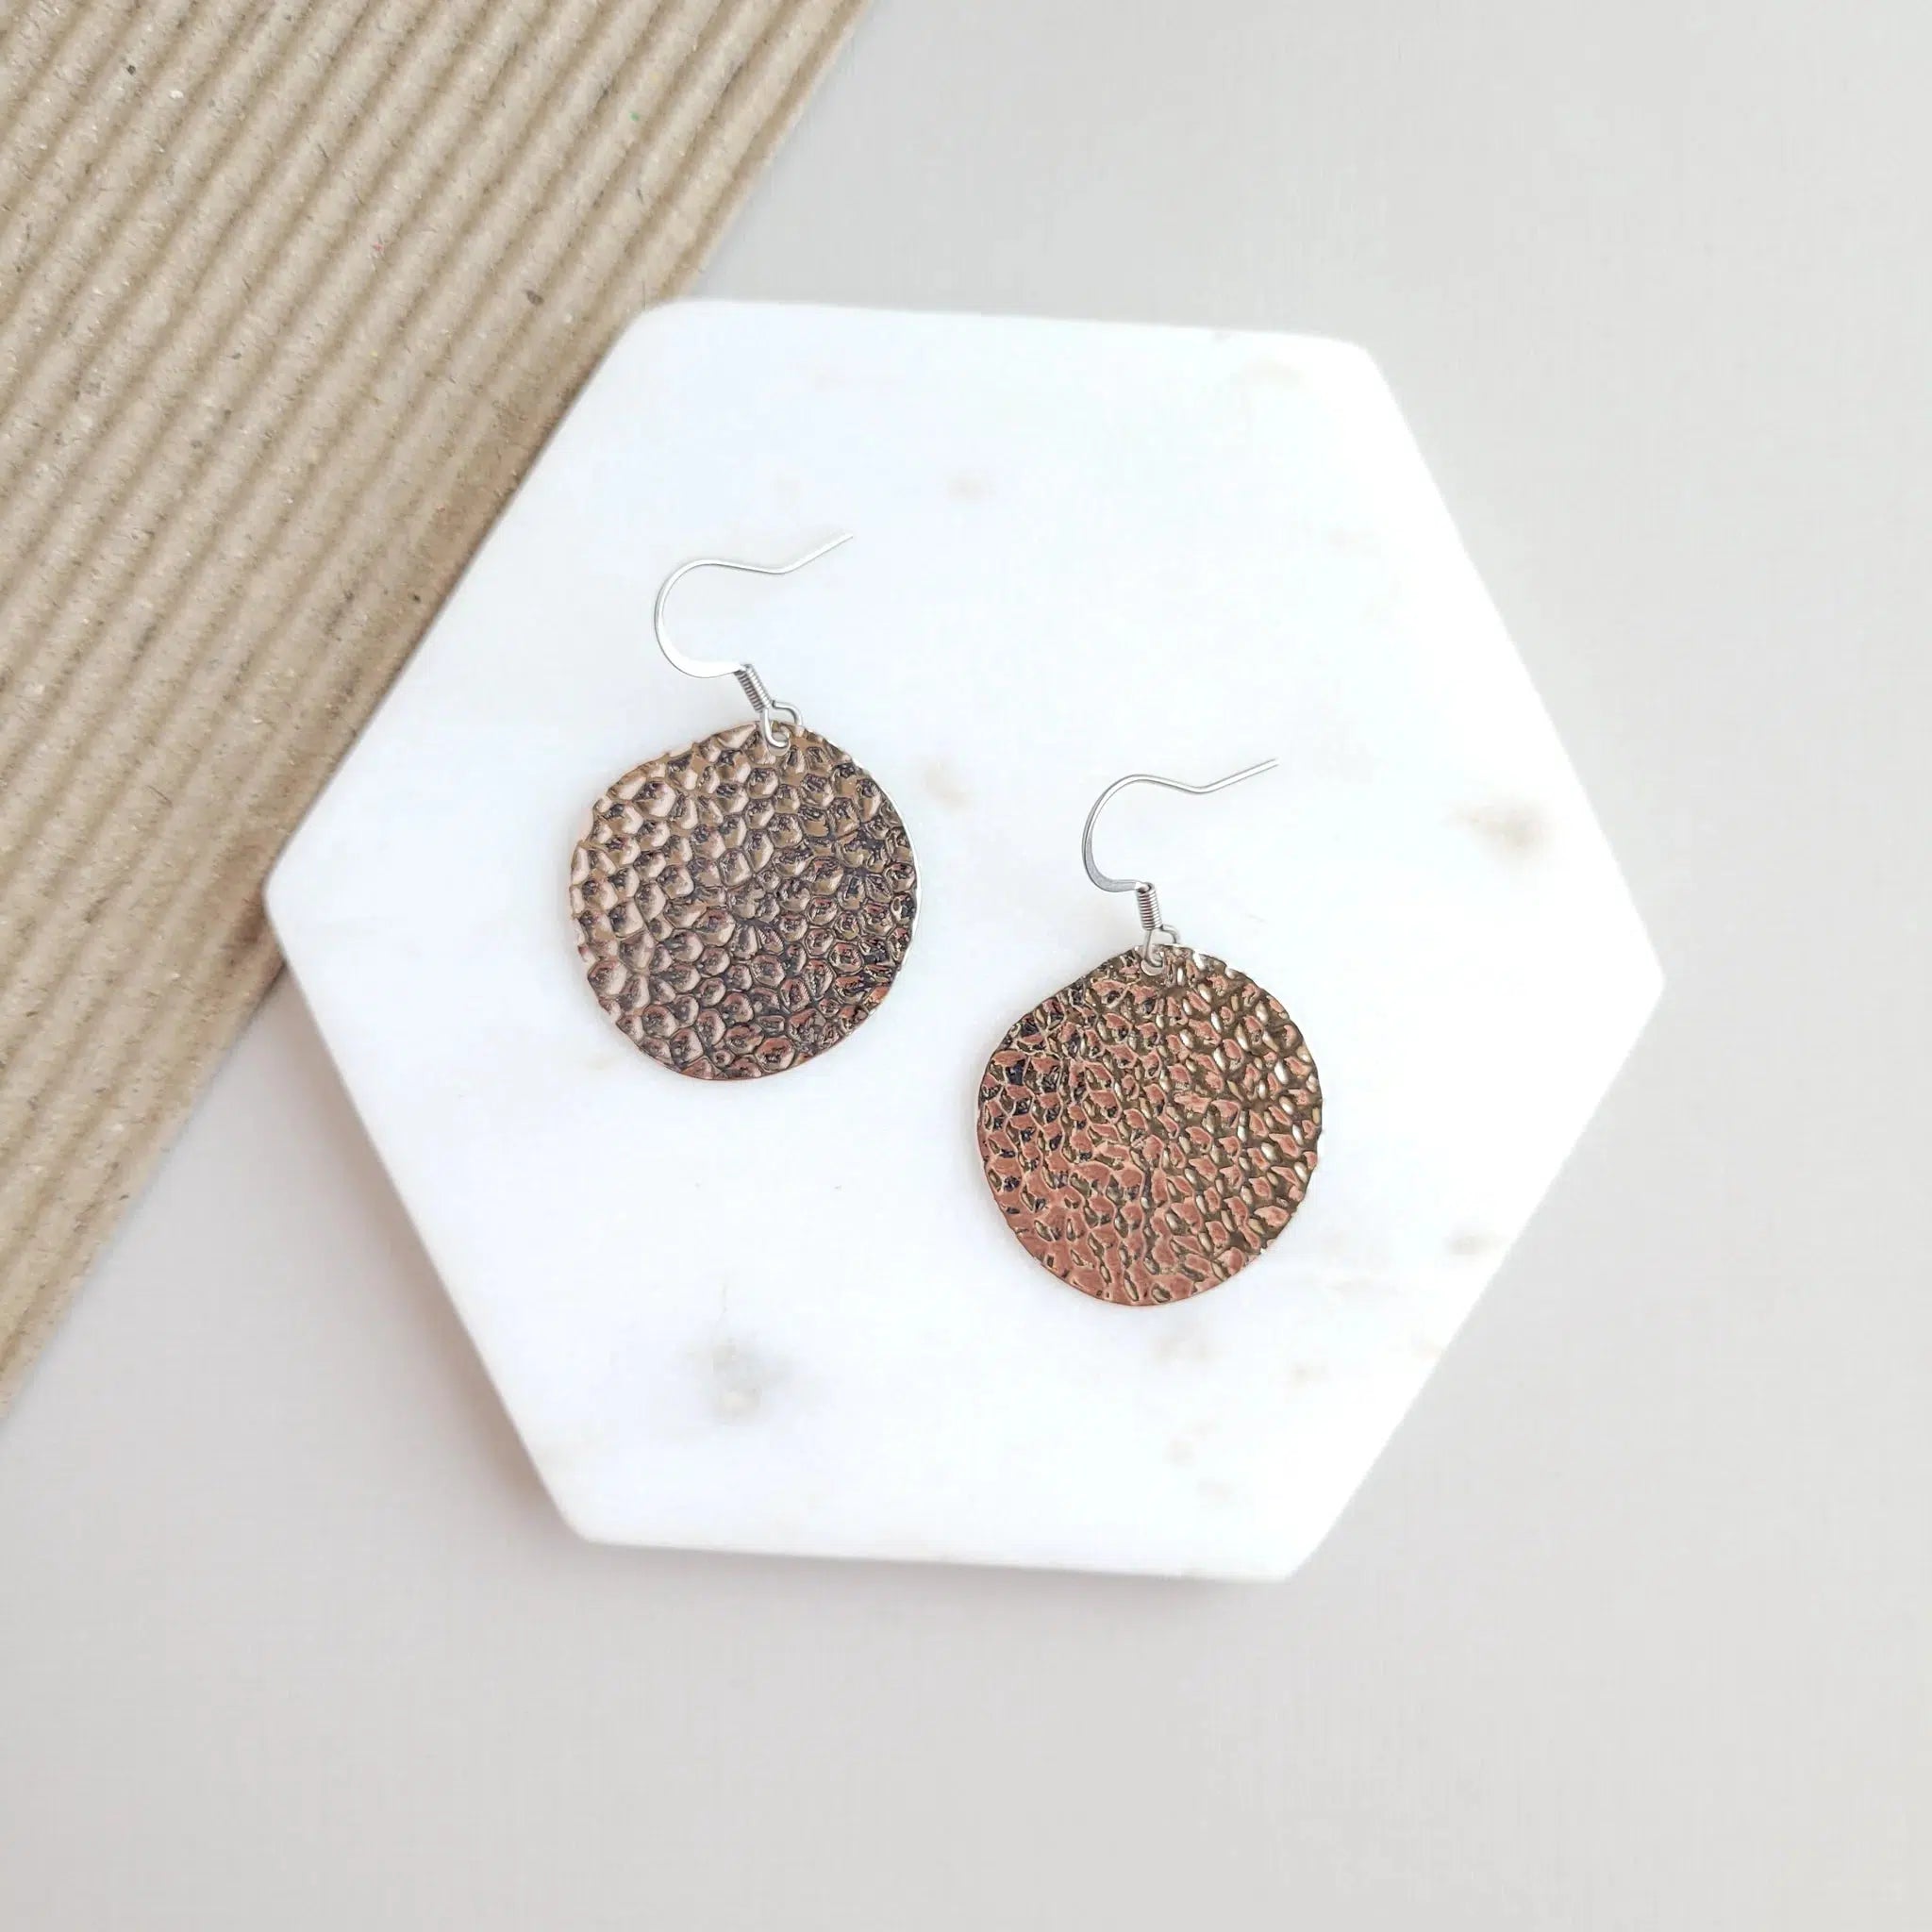 Shop Lucia Hammered Disk Earrings-Earrings at Ruby Joy Boutique, a Women's Clothing Store in Pickerington, Ohio